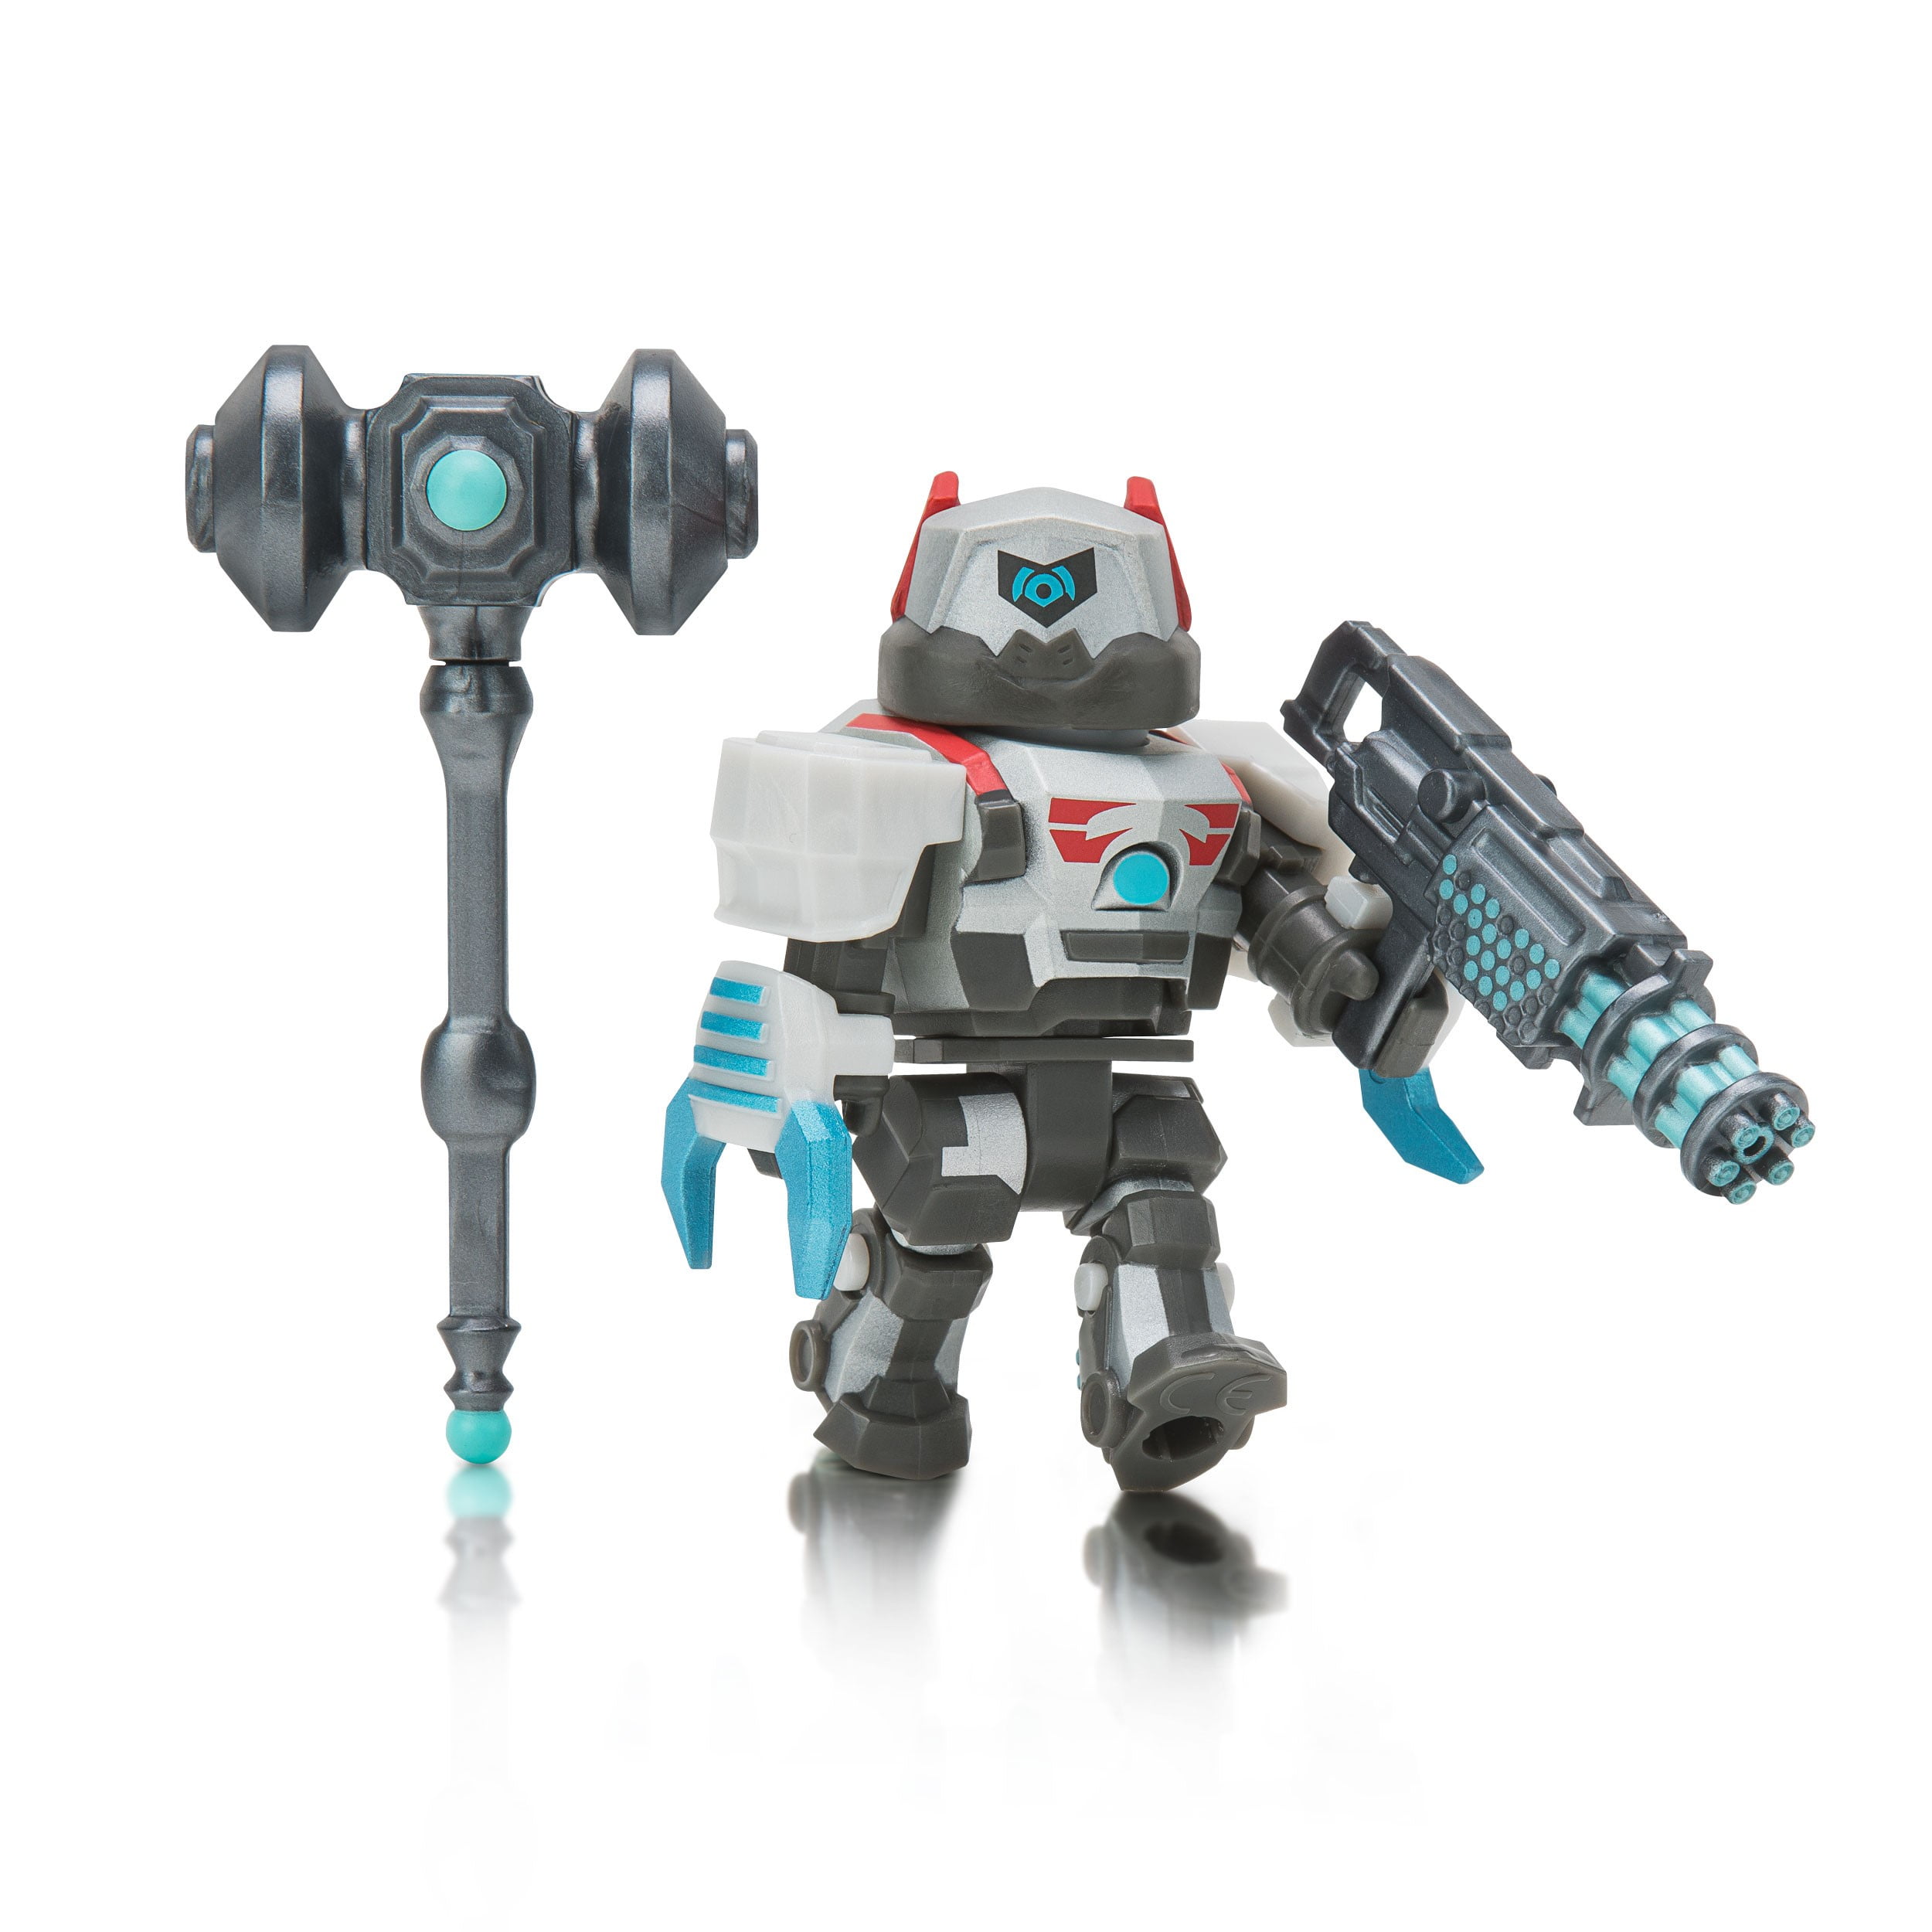 Roblox Action Collection Dueldroid 5000 Figure Pack Includes Exclusive Virtual Item Walmart Com Walmart Com - robot ipad roblox